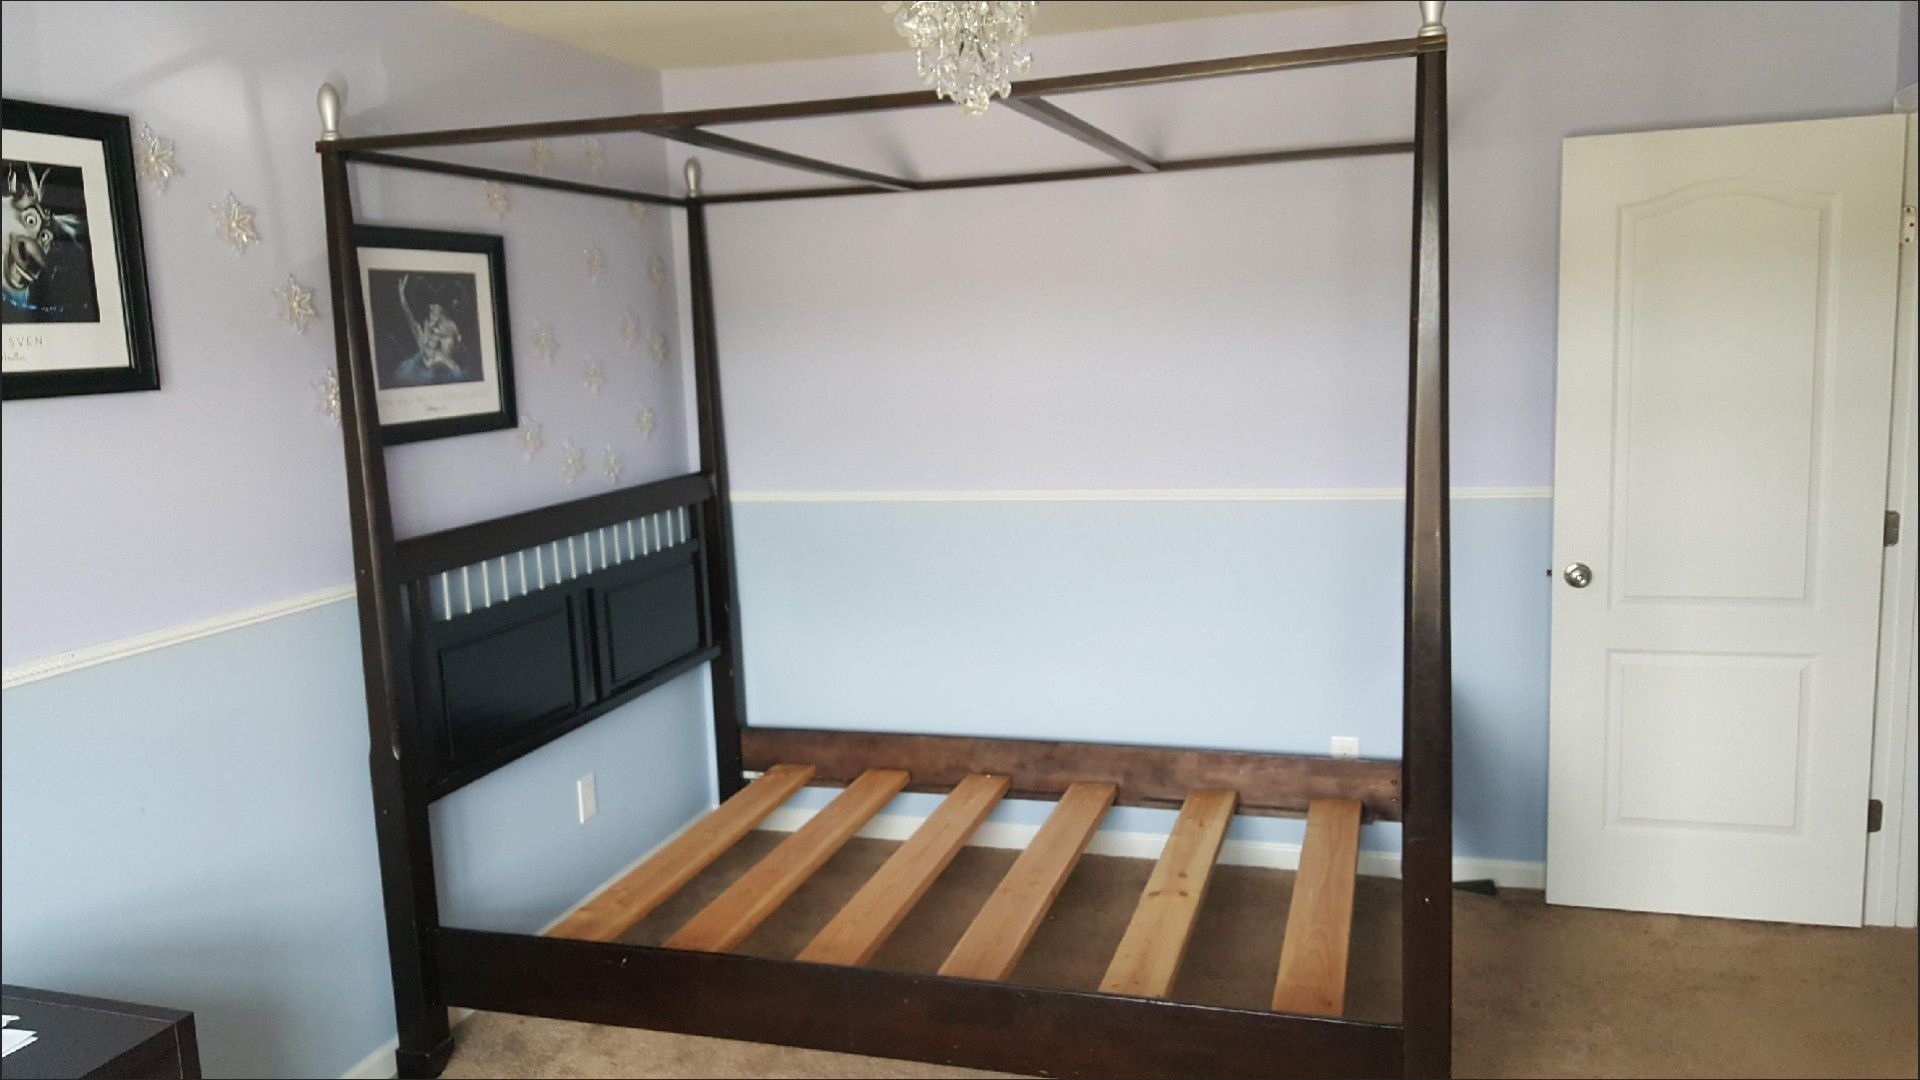 Queen Canopy Bed - Espresso - Great Shape